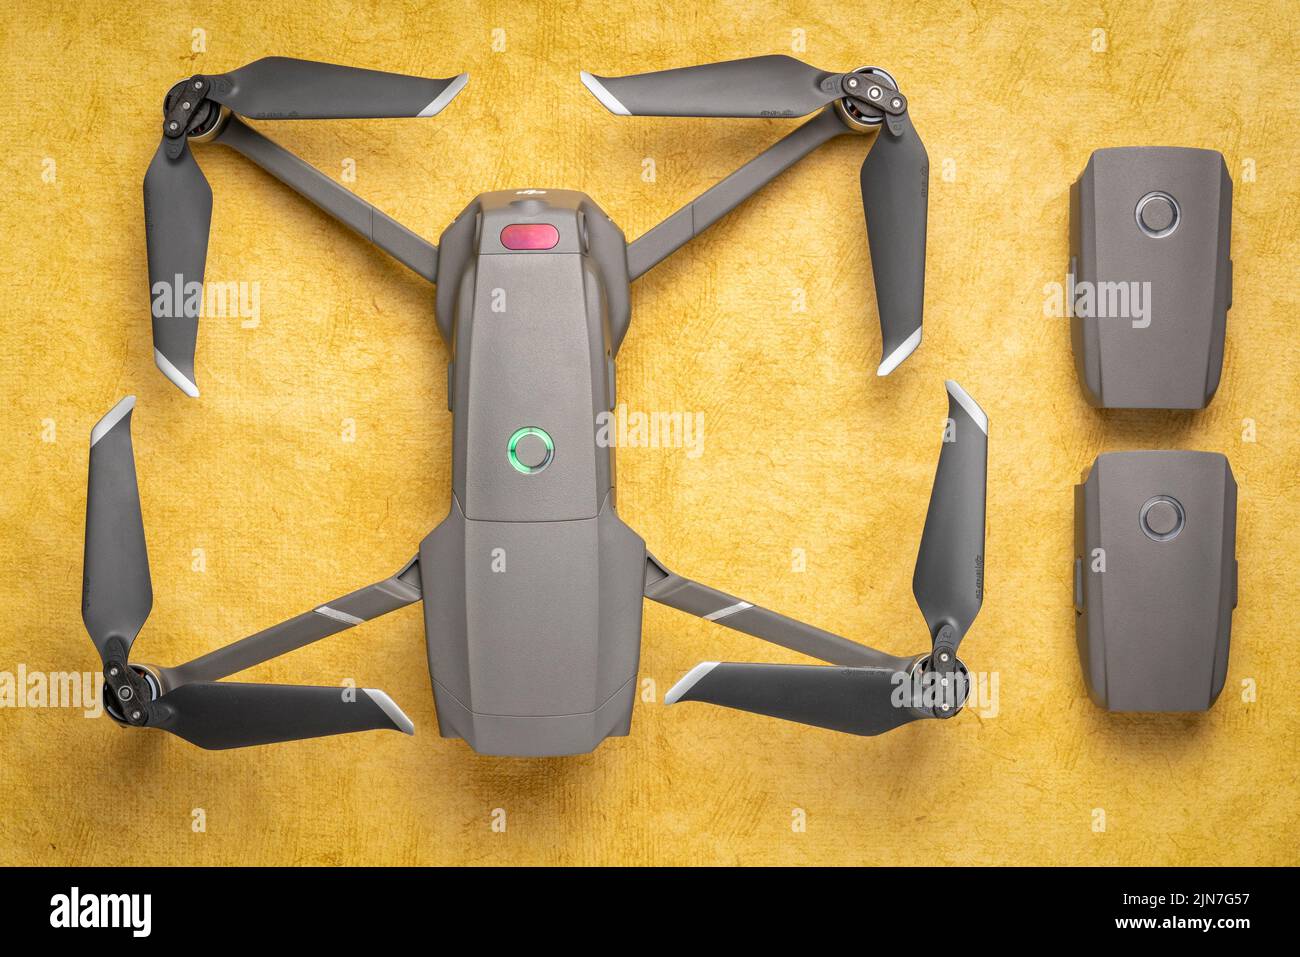 Fort Collins, CO, USA - March 10, 2019  Overhead view of DJI Mavic 2 pro drone with two spare batteries against textured handmade paper. Stock Photo